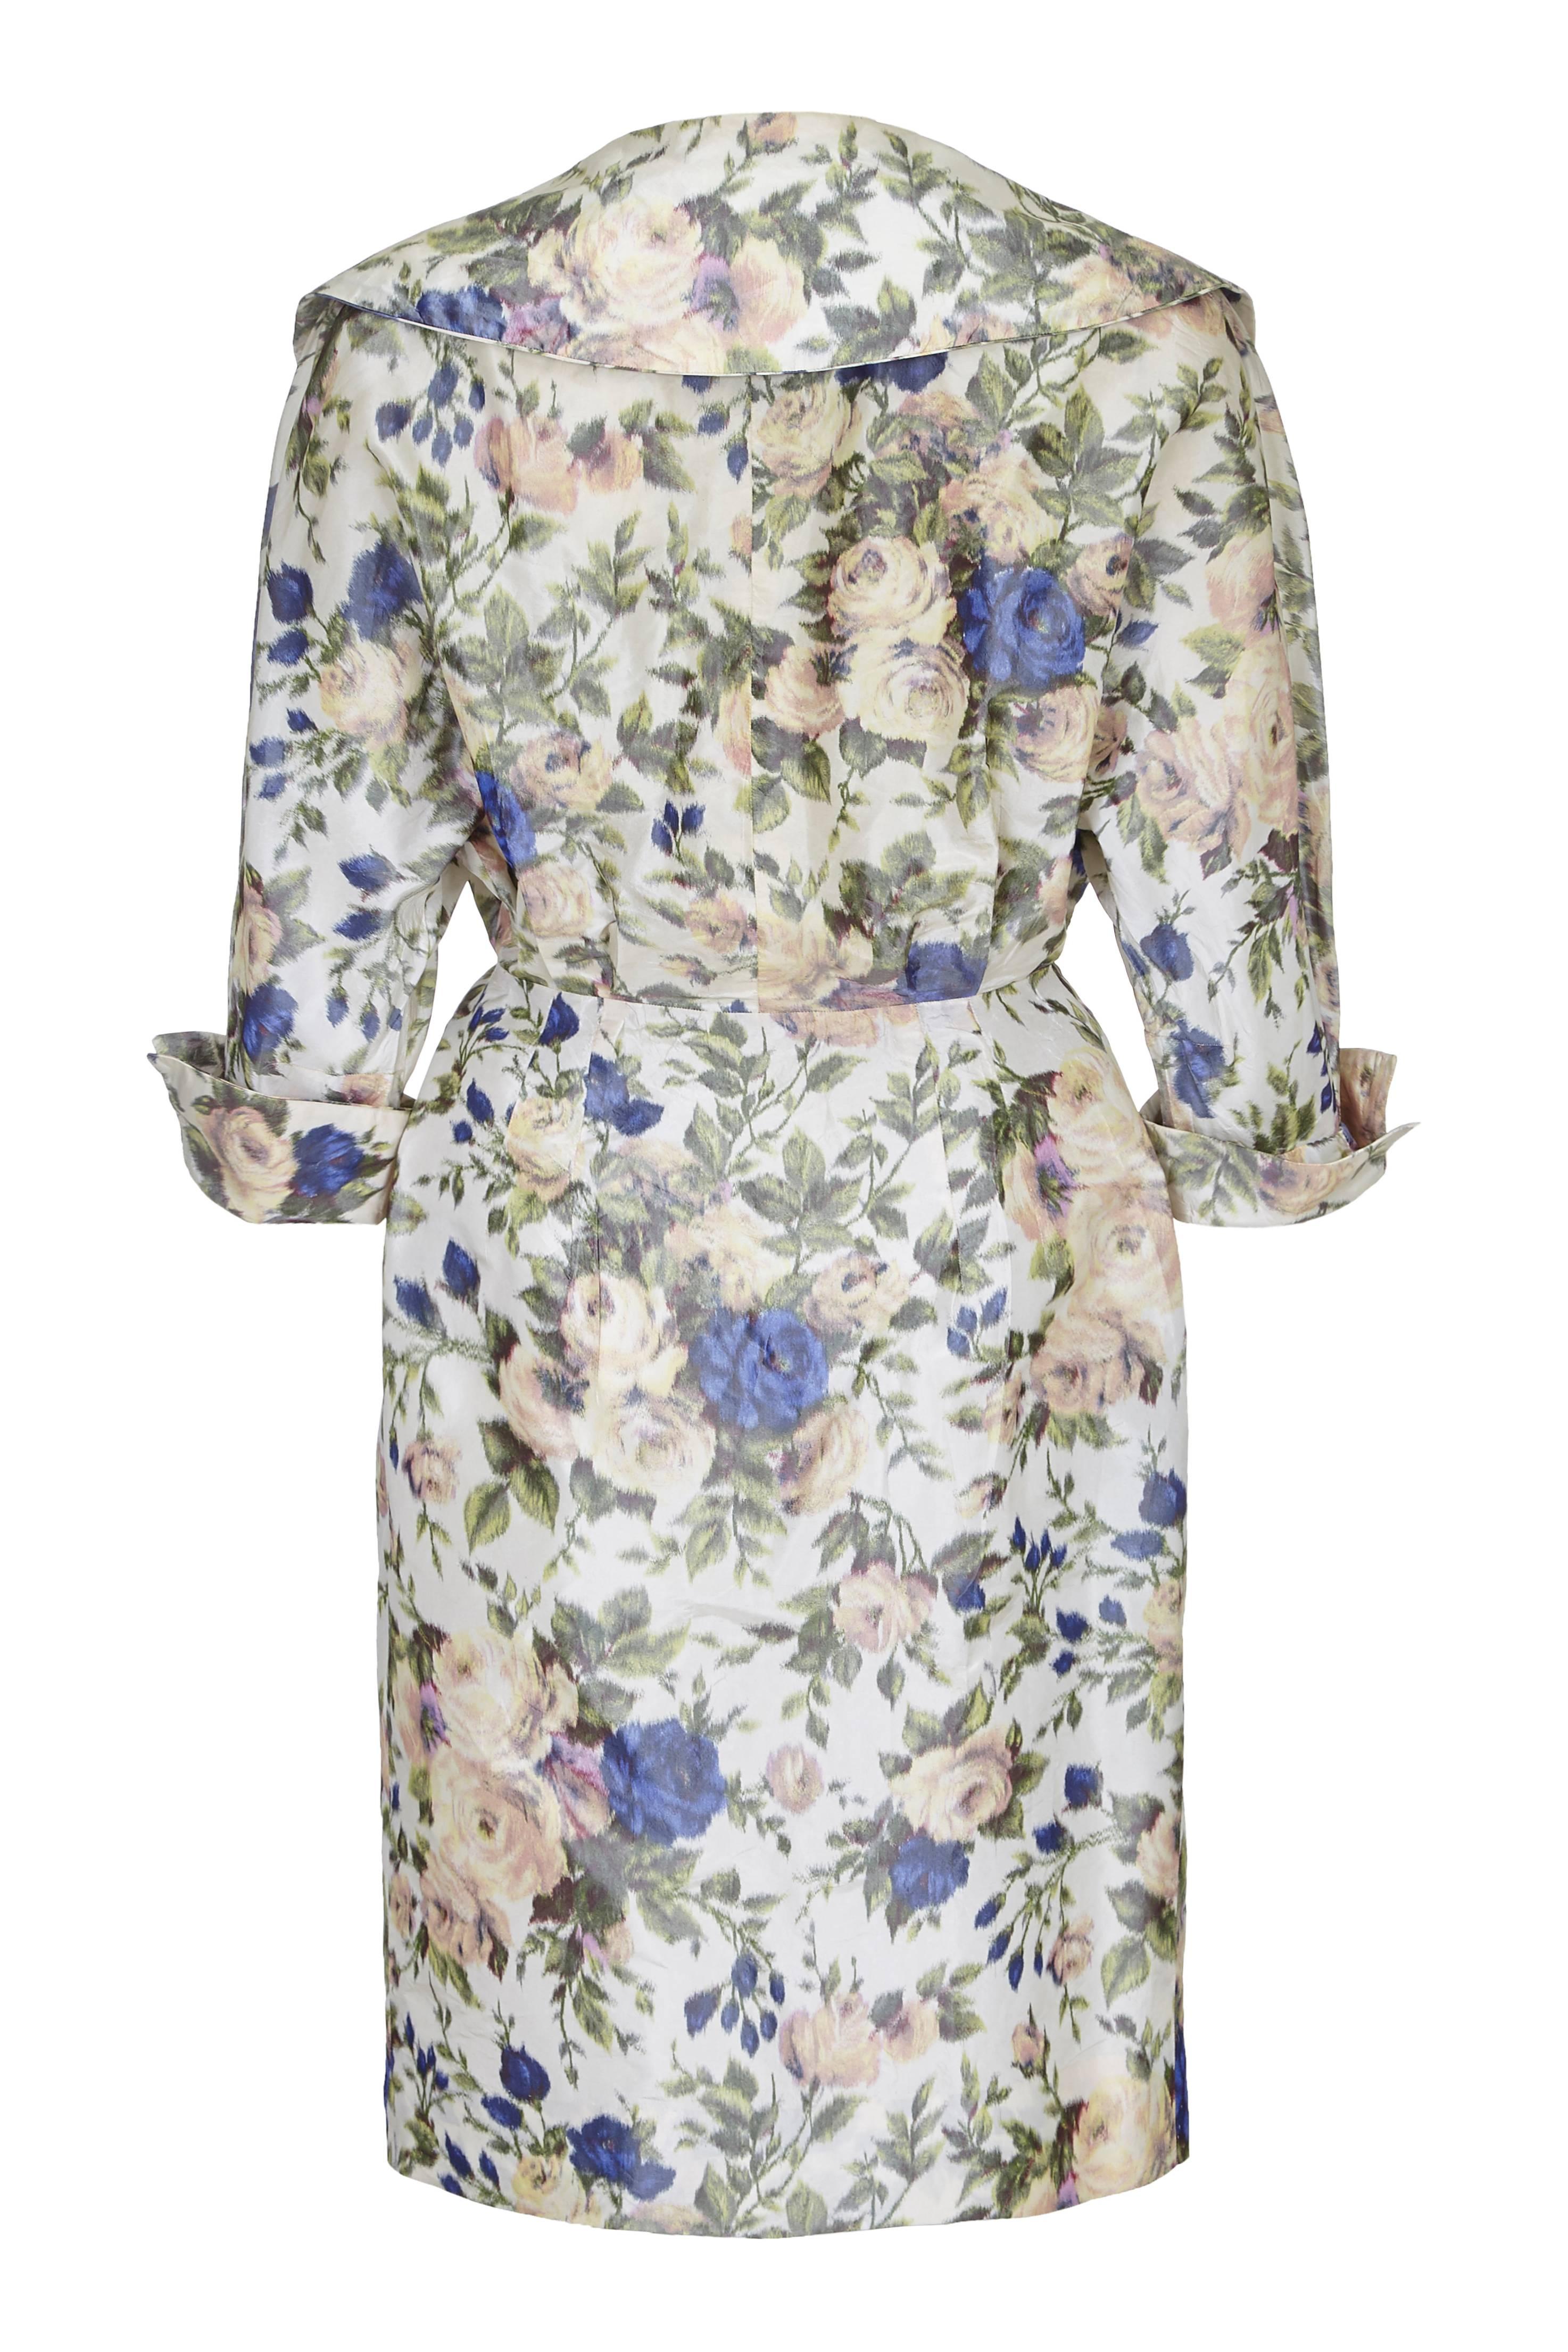 This stylish 1950s French couture silk taffeta rose print dress has a classic 50s ‘New Look’ style features a nipped in waist, broad lapelled collar and oversized fabric-covered buttons. The rose print in gentle pastel tones and contrasting with